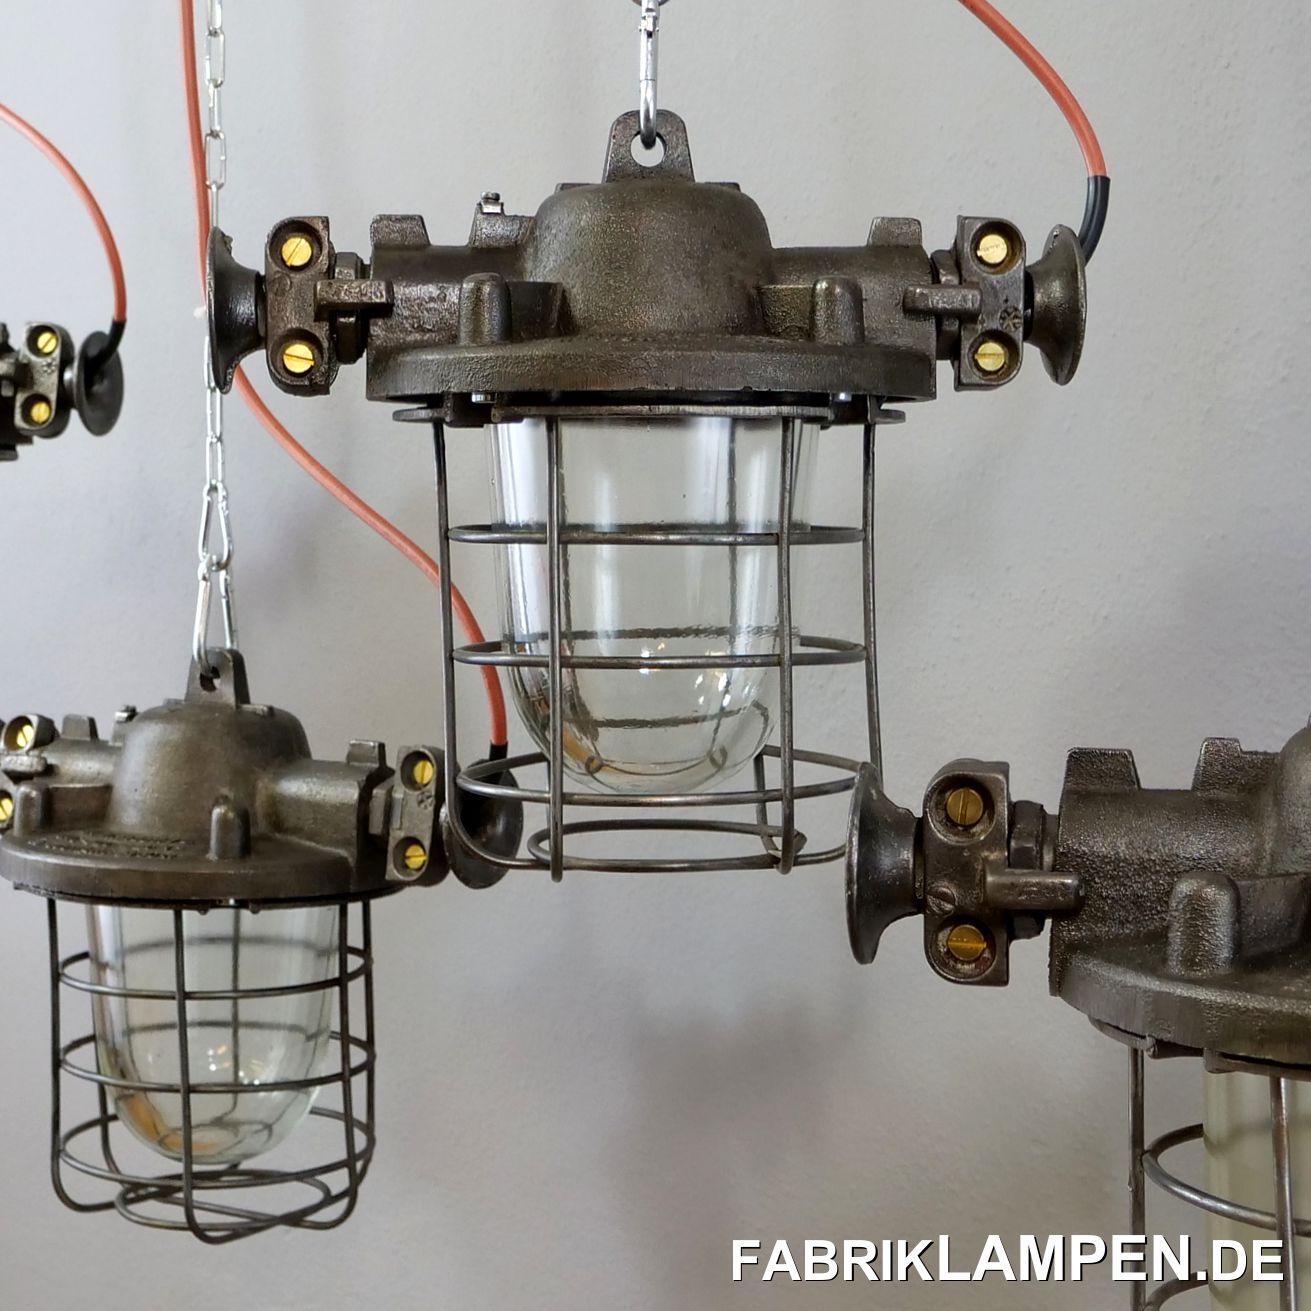  Old industrial lamp, bunker lamp made of cast steel with protective glass and grid. The factory lamps are refurbished. These old factory lamps are very robust in the structure and shape. The massive cable routings on the sides emphasize the strong industrial character. The bunker lamps are cleaned, refurbished (housing and grille ground), preserved and re-electrified (with new E27 ceramic sockets). Material: cast steel housing, steel grid, protective glass (thermoglass).Dimensions: Height of the lamps (with the suspension eye) 31 cm, diameter housing (without cable routing) about 23 cm, total width with the ears about 36 cm.Attention: the weight of the old industrial lamp is a proud 9.5 kg - the lamps need a load-bearing ceiling structure and massive chains for suspension. The old factory lamps are supplied with suspension eye and 2 meters of cable (other lengths are of course possible), on request they can be equipped with chain suspension (at extra cost). 